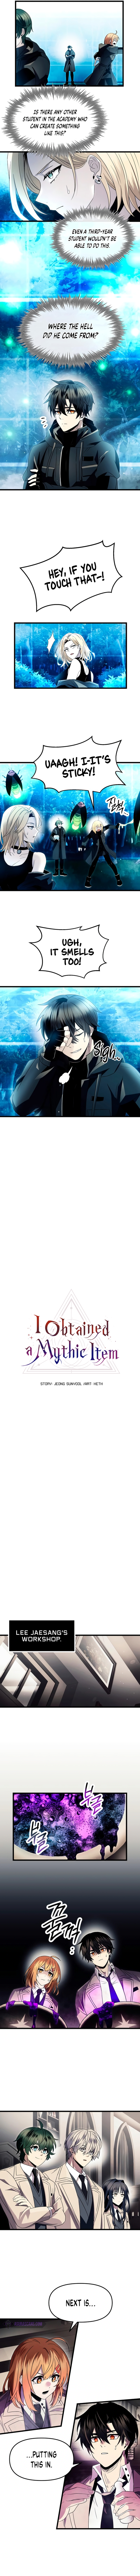 I Obtained a Mythic Item Chapter 68 - Page 1